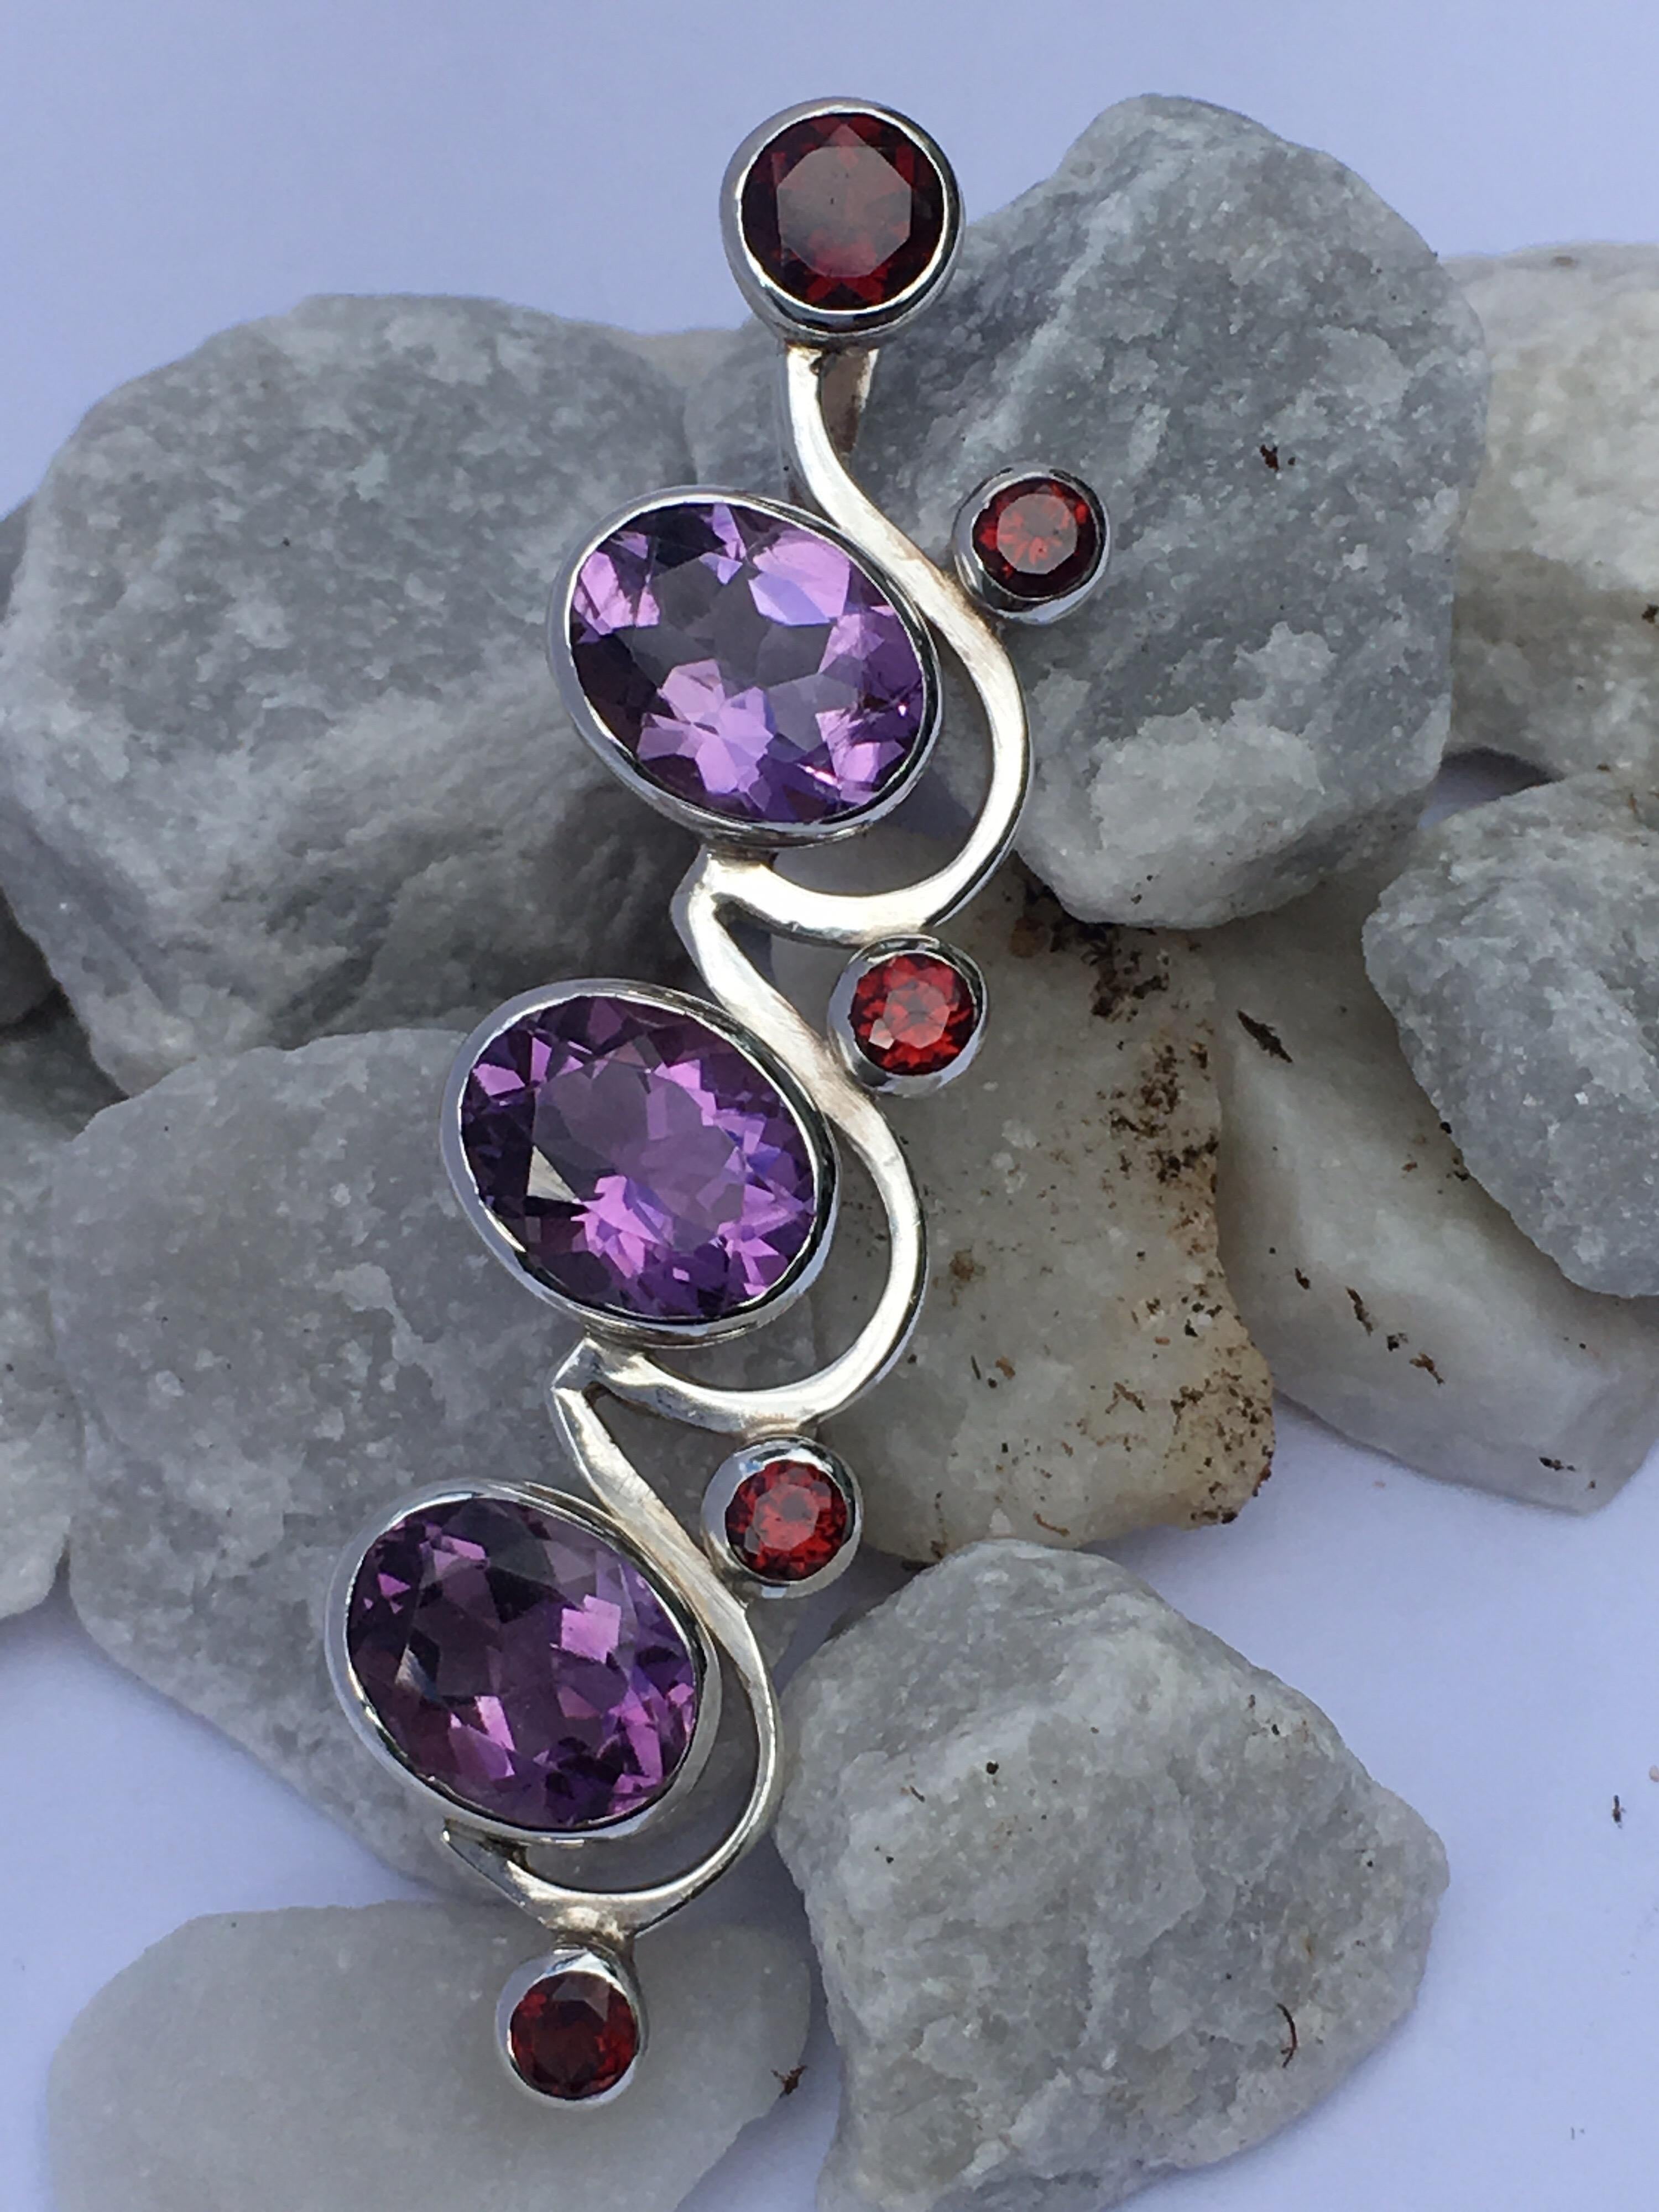 Oval Amethyst 7 MM X 9 MM , Round Garnet 5 MM and other  round Garnet 3 MM set in sterling silver.
All the stones are hand cut and polished .
The pendant is hand crafted by skilled silver smith.
Silver chain is included with the purchase. 